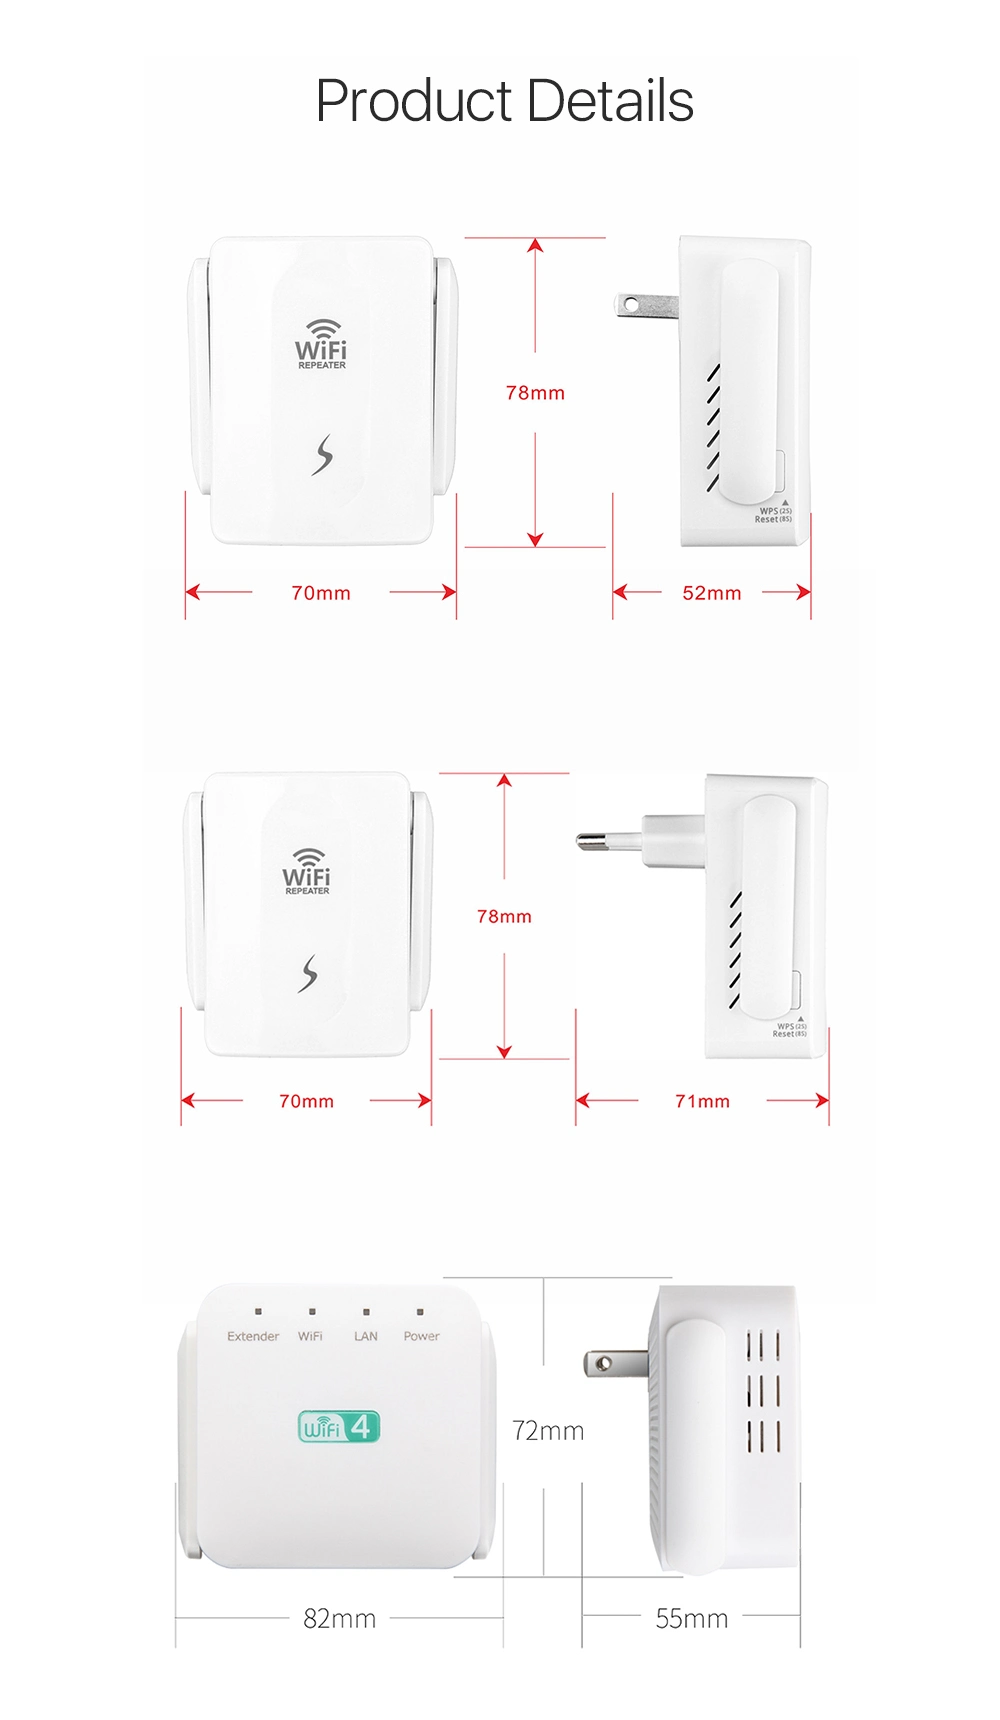 Lyngou LG527 WiFi Signal Booster Range Extender Repeater 300m Network Amplifier Network Router WiFi Repeater Extender